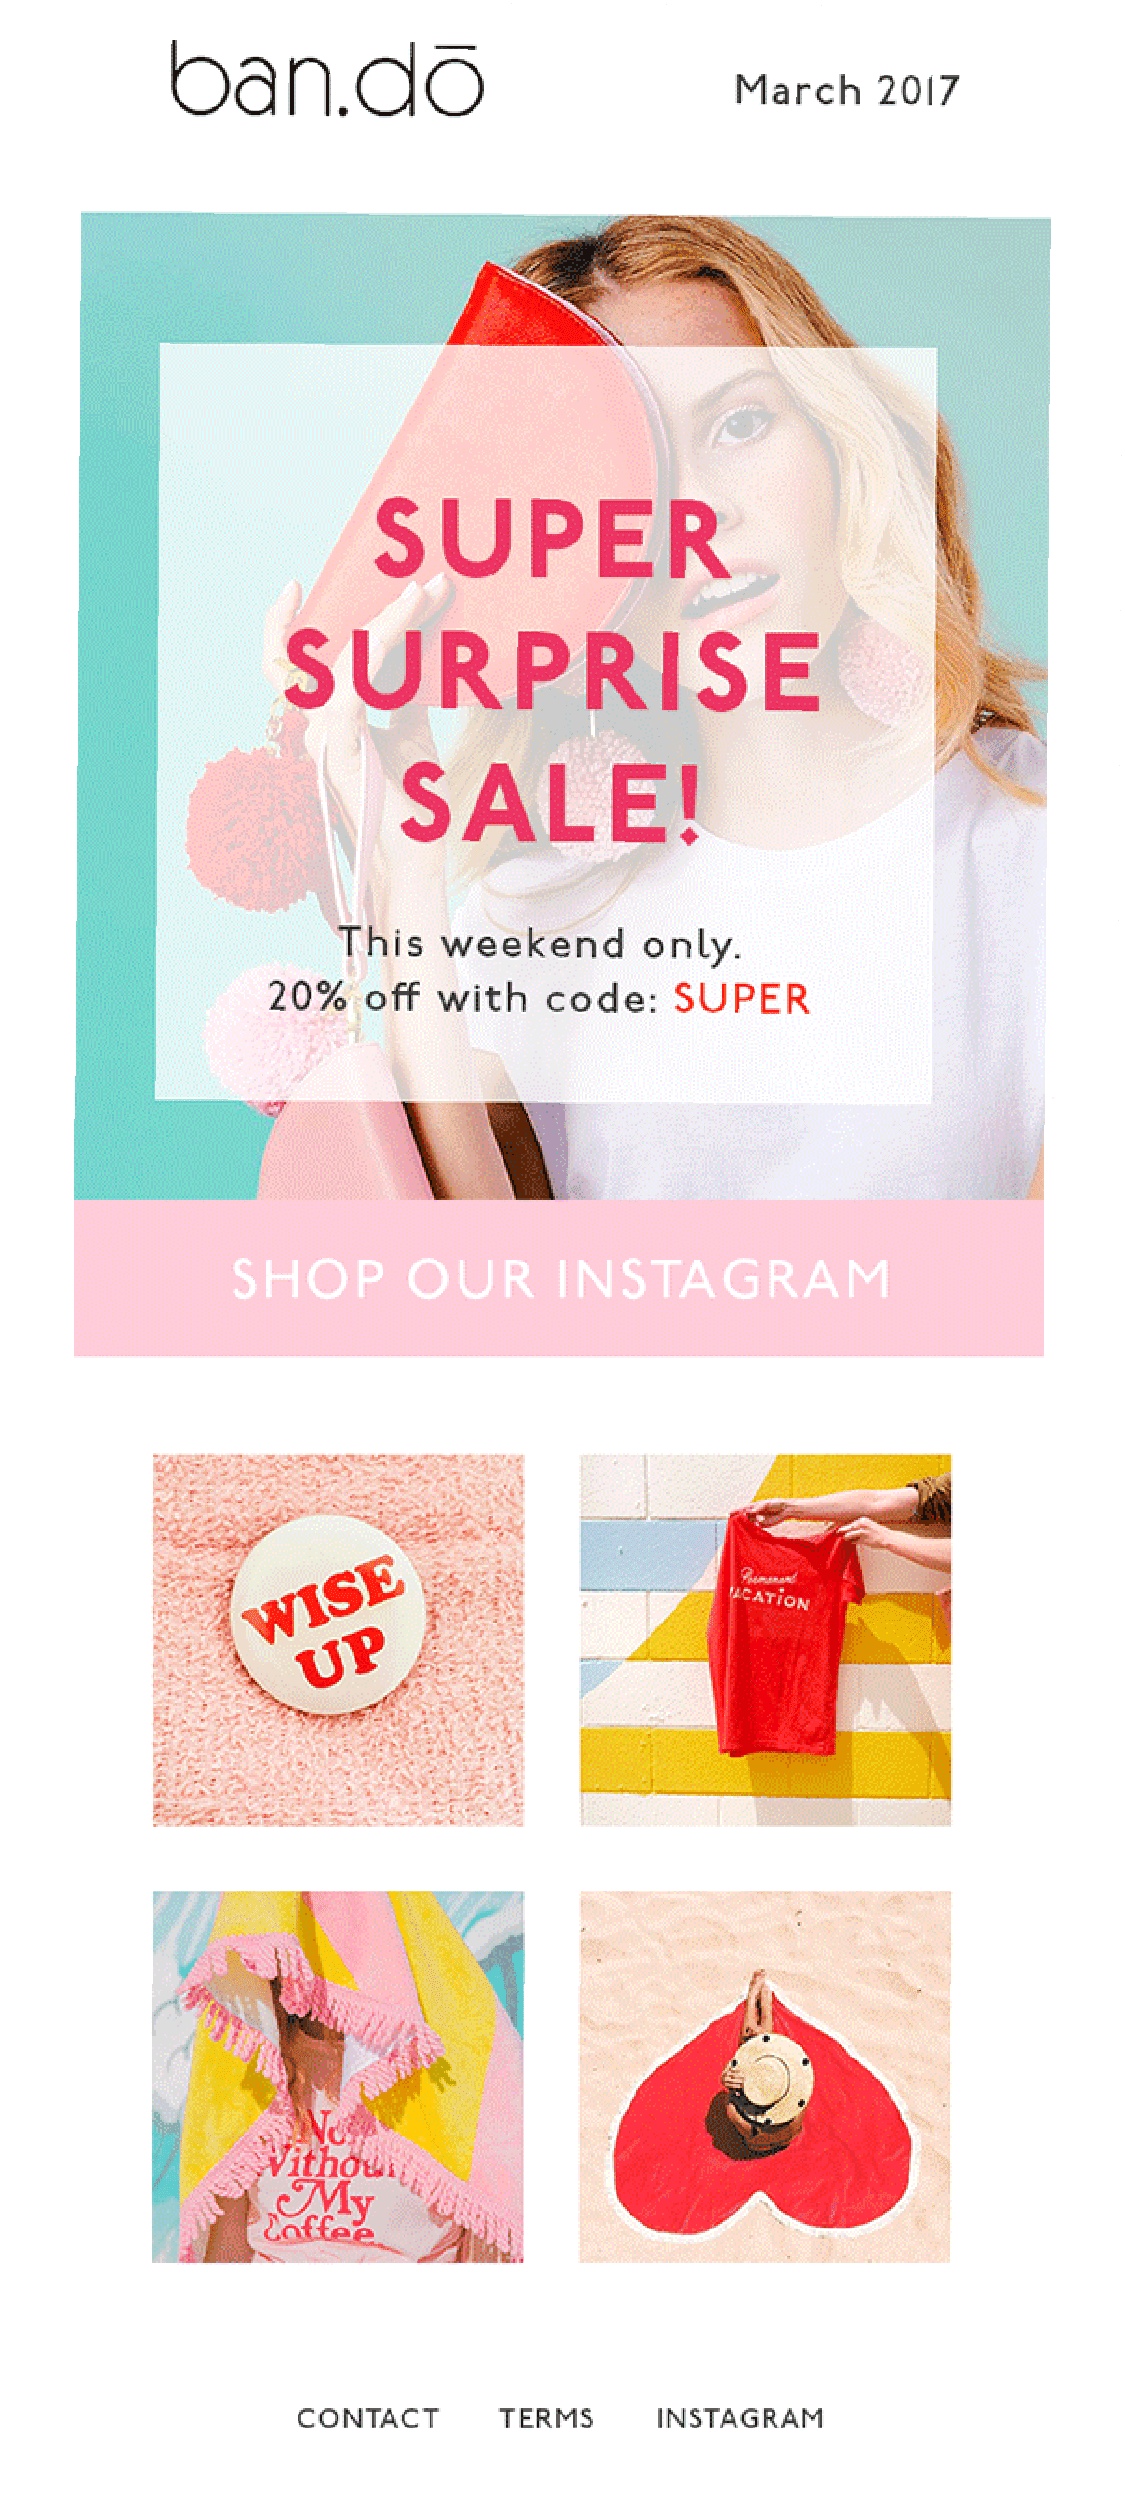 eMedEvents on Instagram: Our end-of-year sales started! Use promo